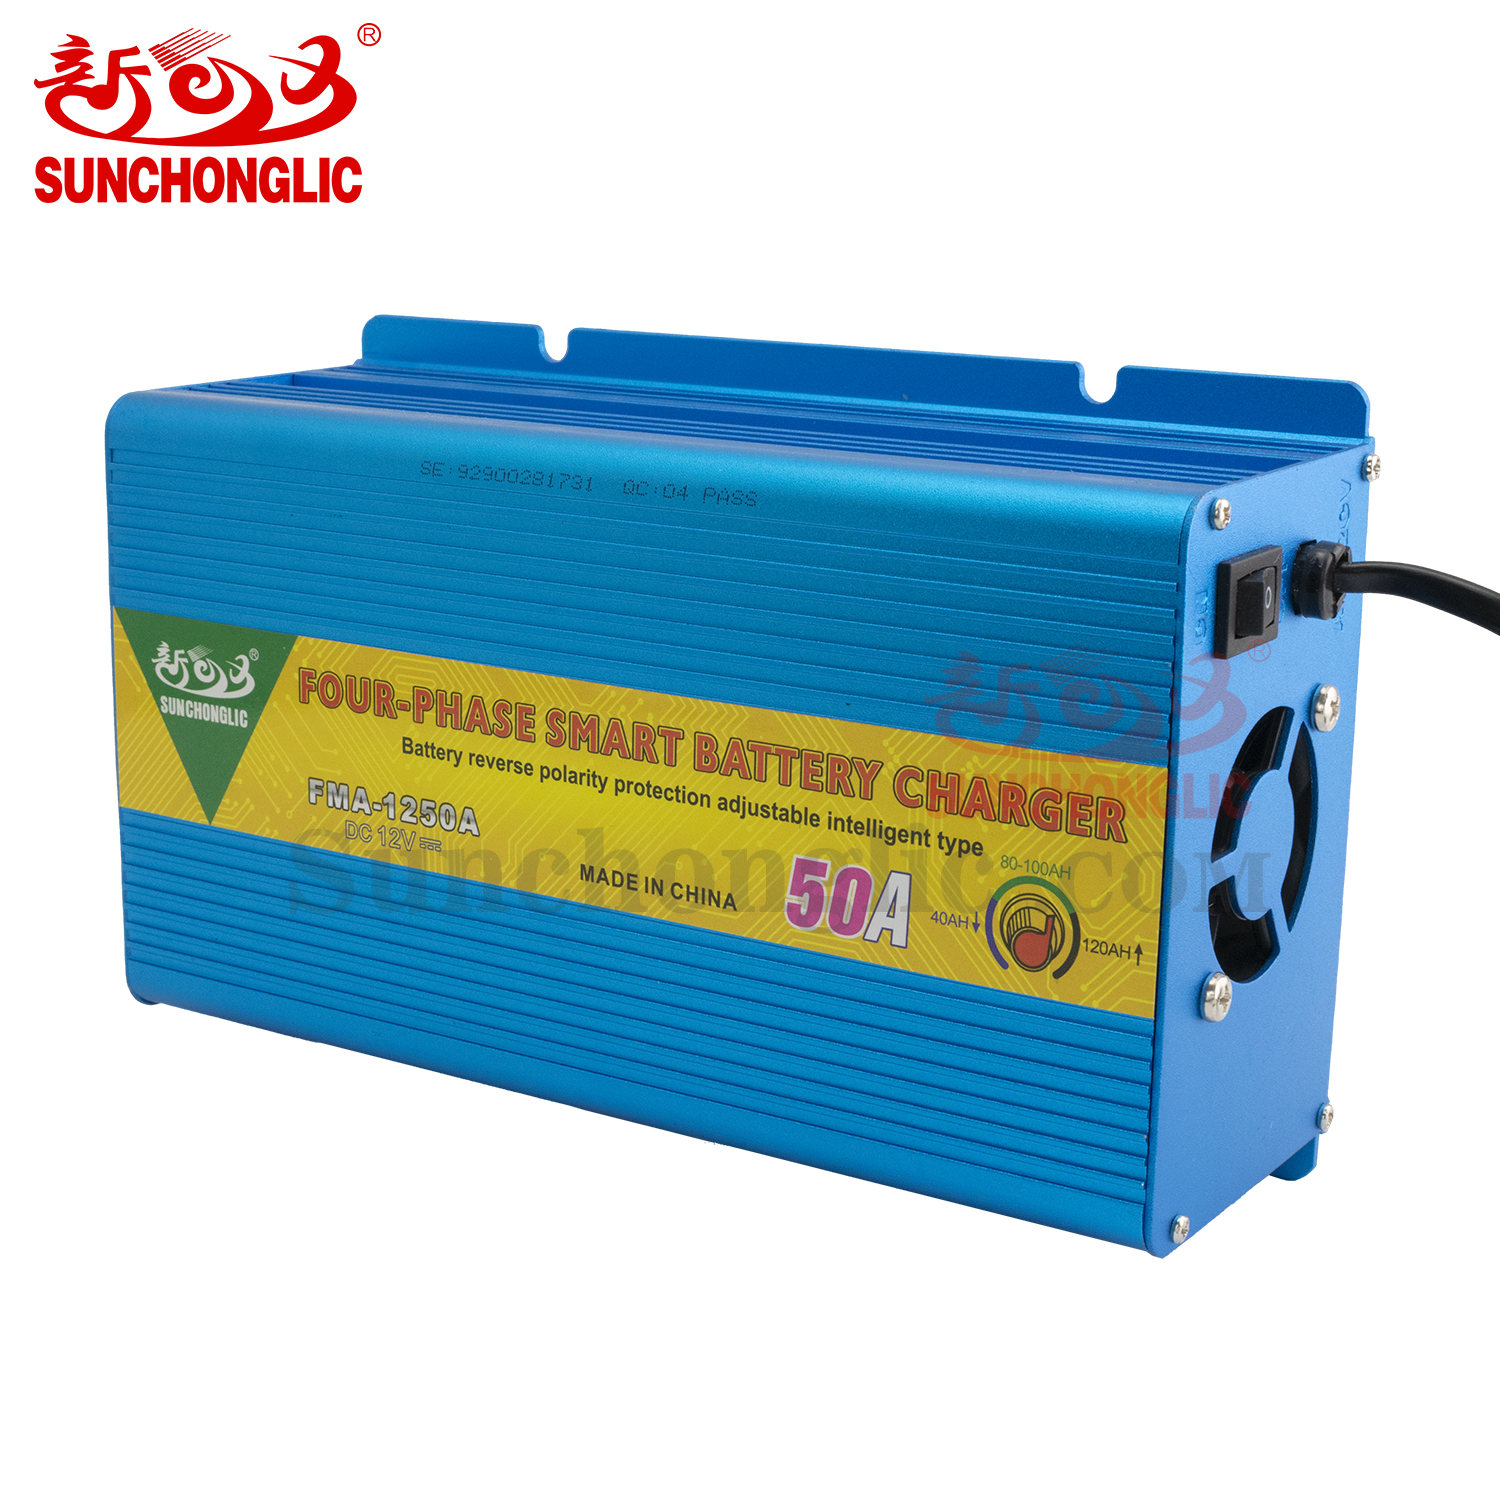 AGM/GEL Battery Charger - FMA-1250A